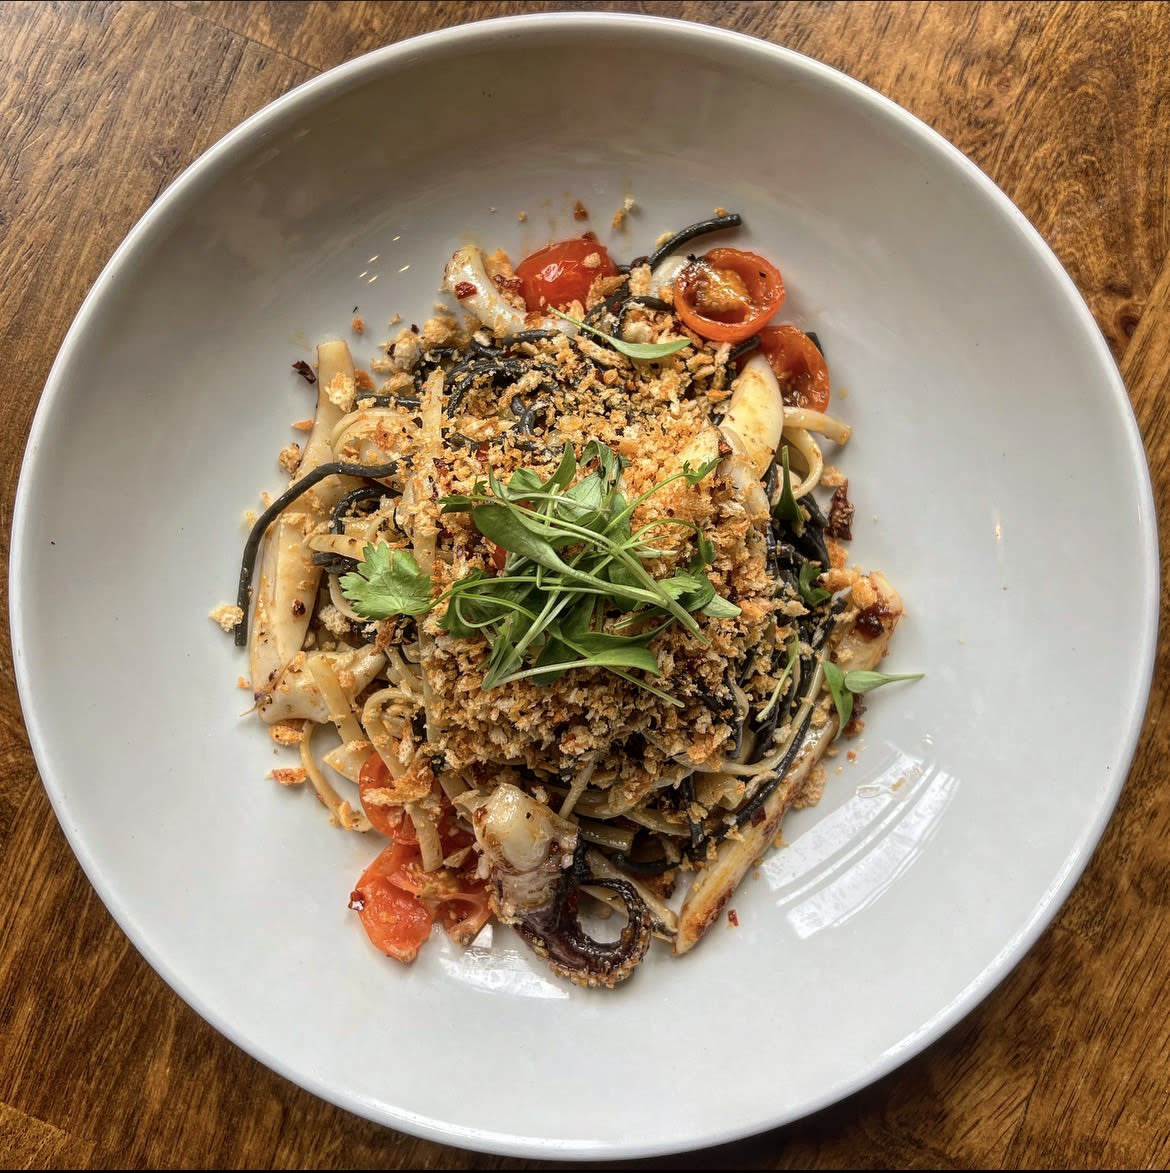 🍝 Tuesday Treat - Cuttlefish linguine- pop in a try 🤤
.
.

PS Sun is out - why aren’t you?

#tulsehillhotel #summer #gastropub  #lambeth #tulsehill #hernehill #brockwellpark #foodie #welovefood #sw24 #tothepub